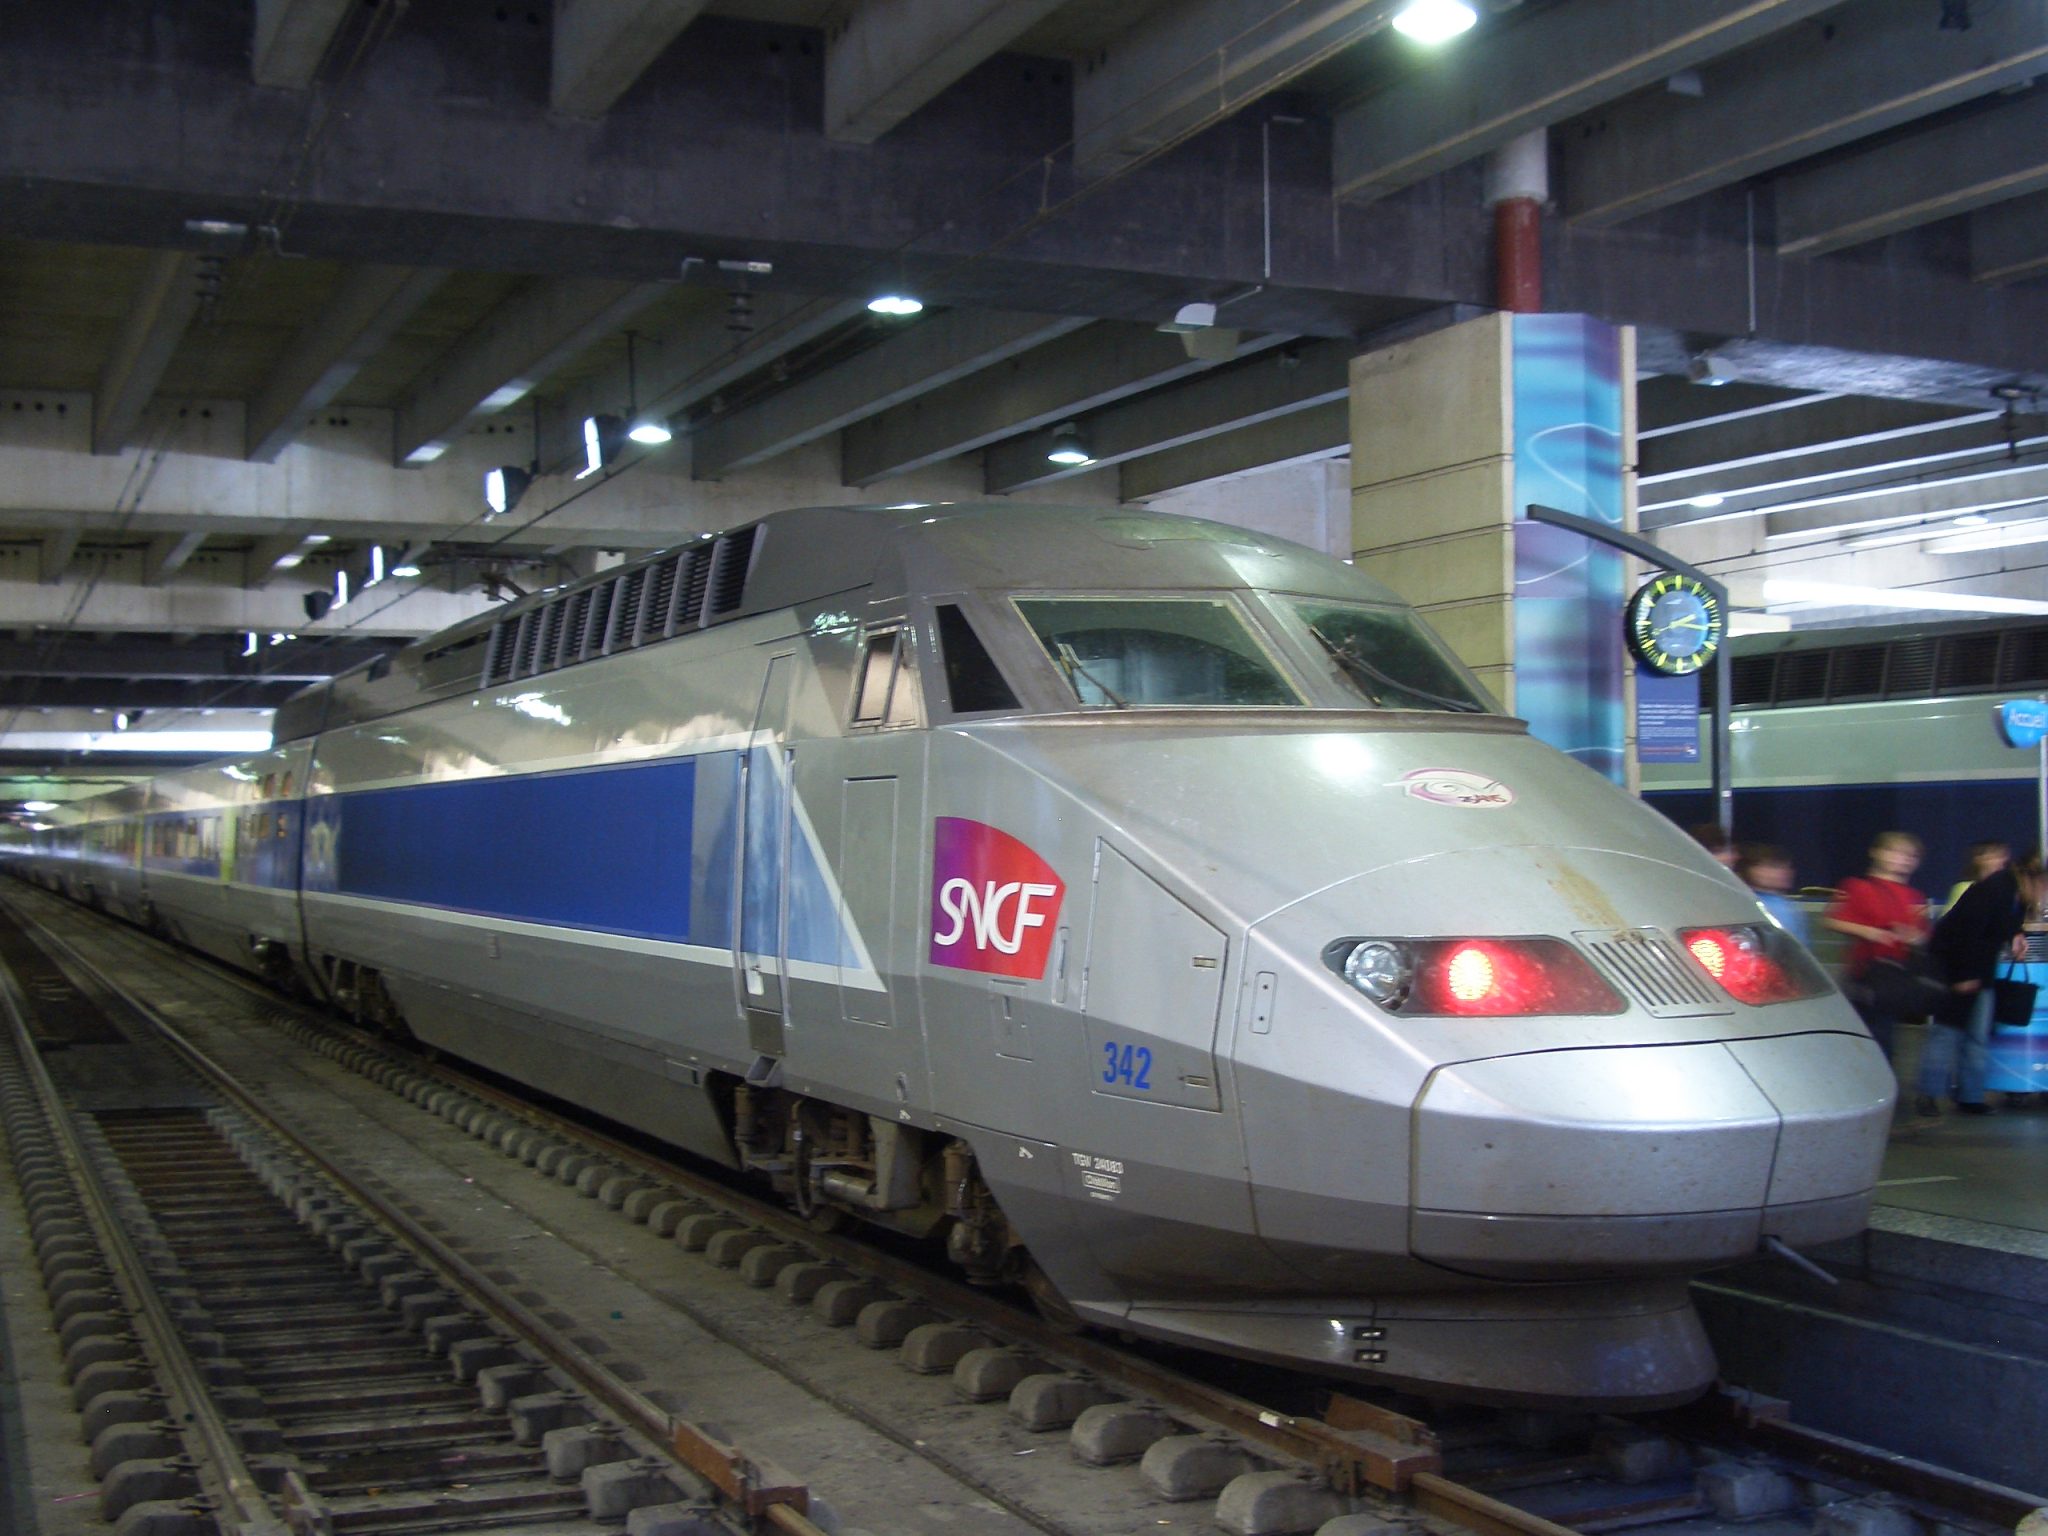 UIC, the worldwide railway organisation, welcomes ground-breaking support for passenger modal shift to rail from the French government